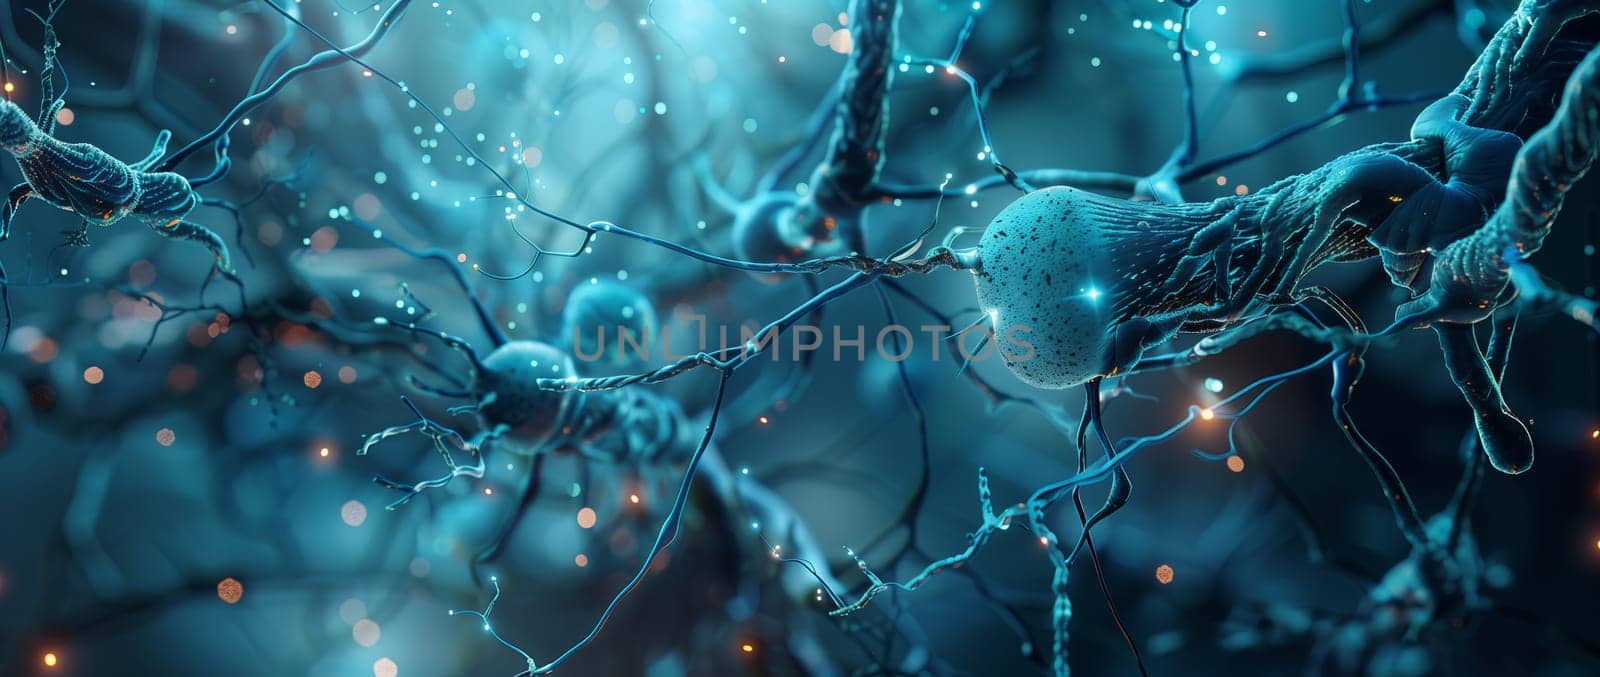 a computer generated image of a nerve cell in the brain by richwolf